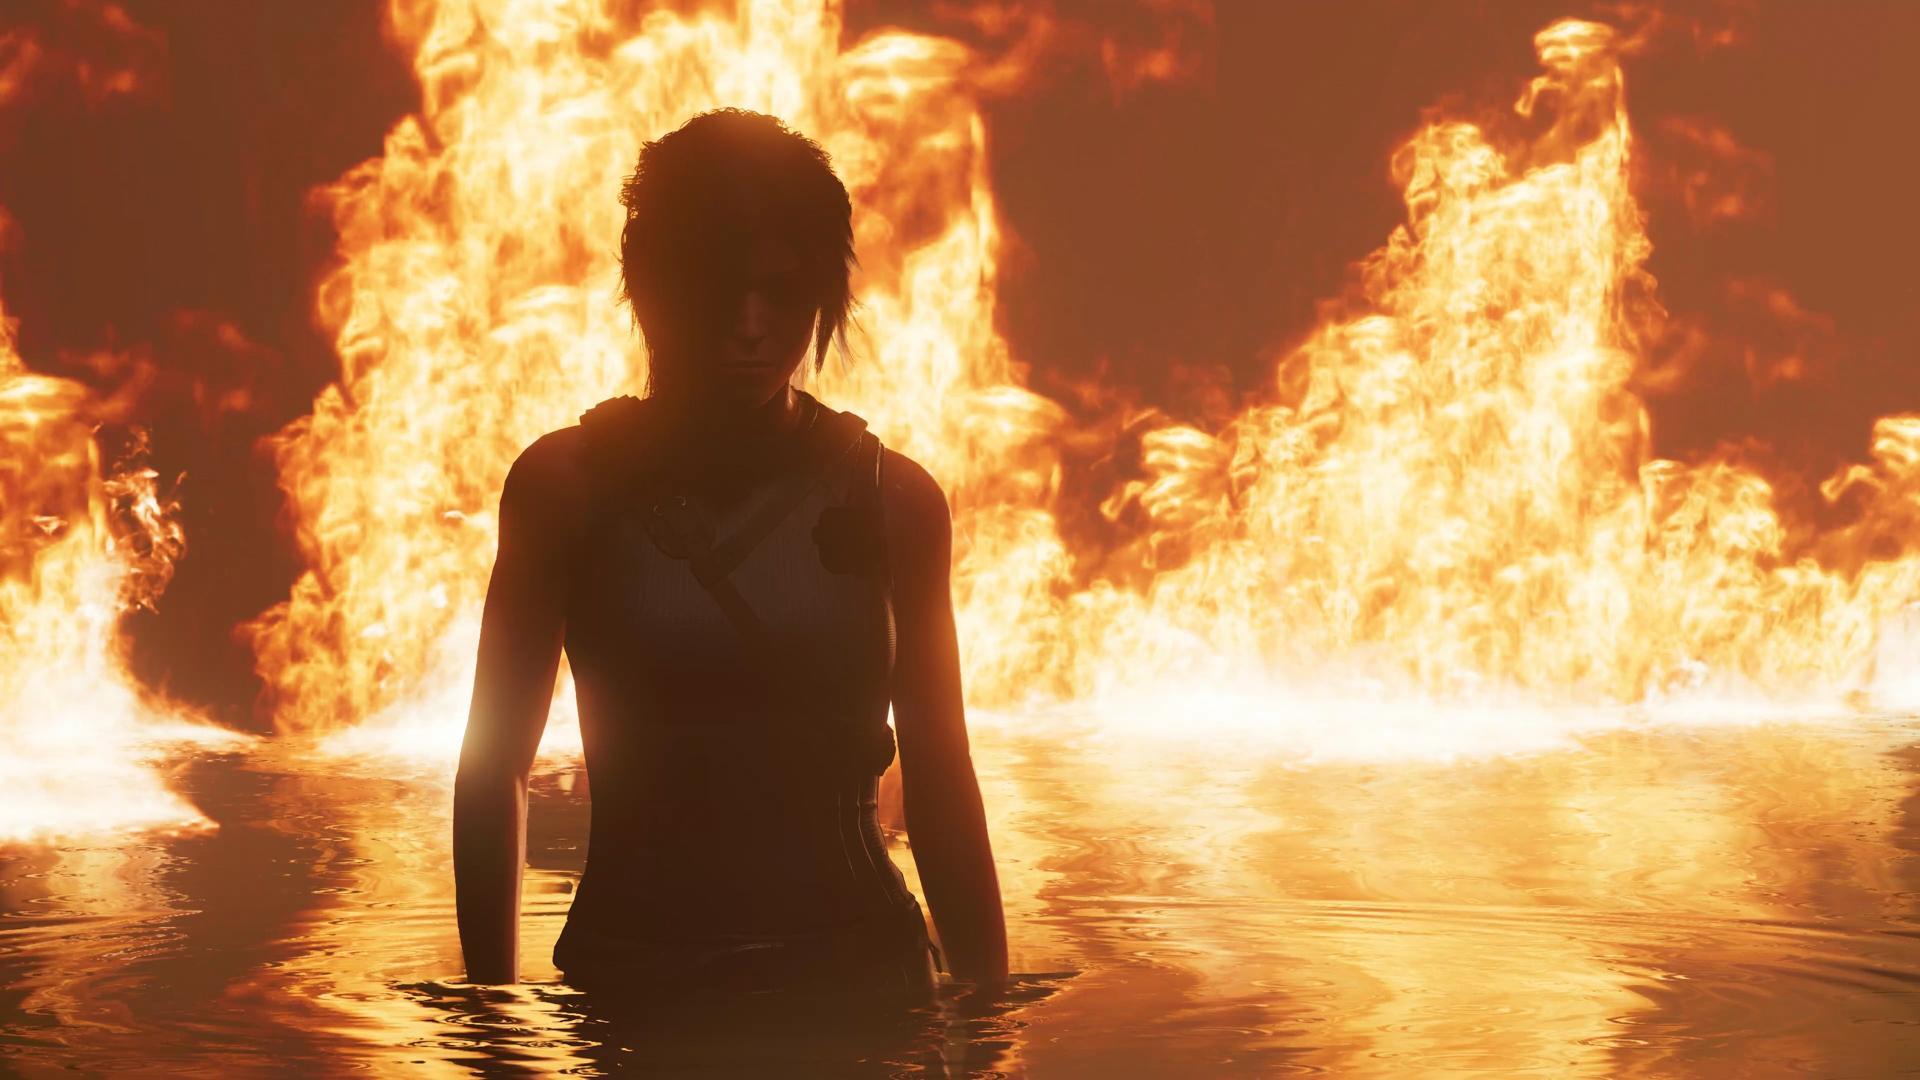 Lara Emerges from the Burning Water